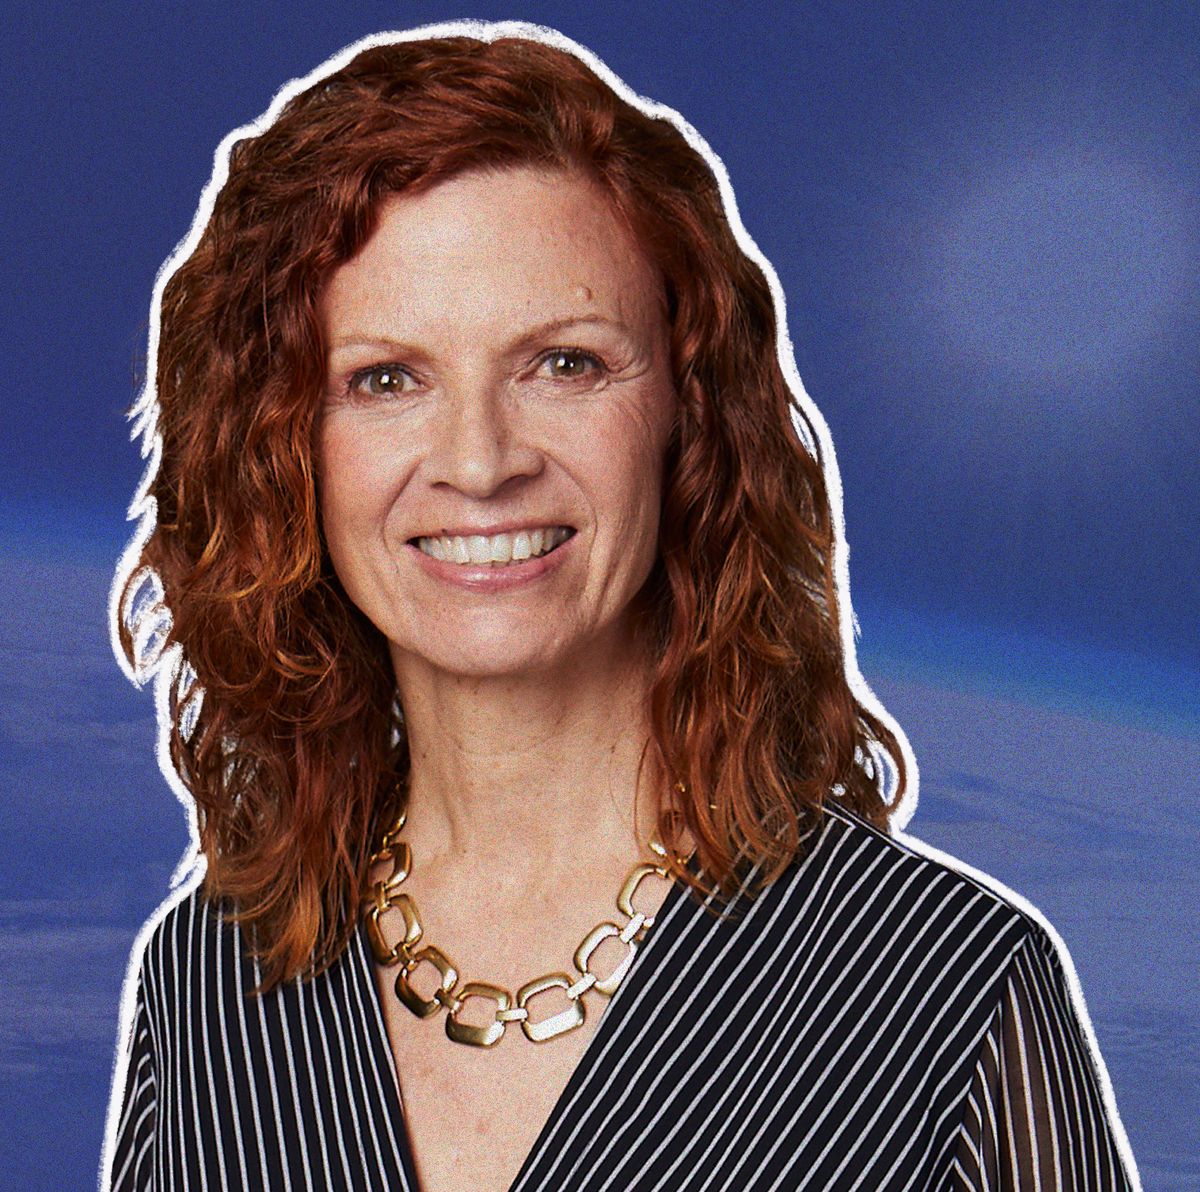 space perspective founder jane poynter